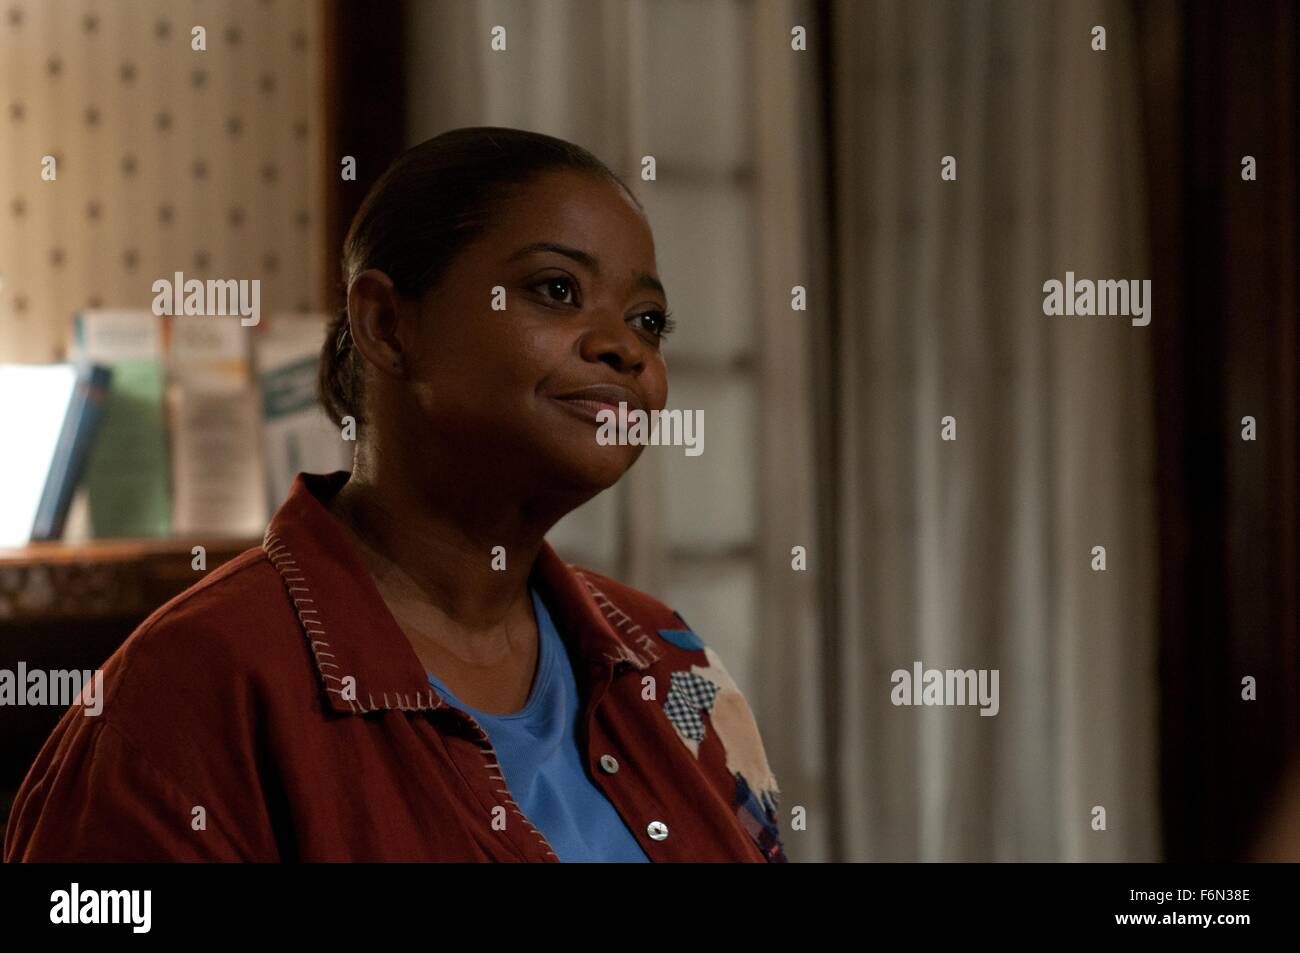 RELEASE DATE: January 22, 2012 MOVIE TITLE: Smashed aka Lioma STUDIO: Sony Pictures Classics DIRECTOR: James Ponsoldt PLOT: A married couple whose bond is built on a mutual love of alcohol gets their relationship put to the test when the wife decides to get sober. PICTURED: OCTAVIA SPENCER as Jenny (Credit Image: c Sony Pictures Classics/Entertainment Pictures) Stock Photo